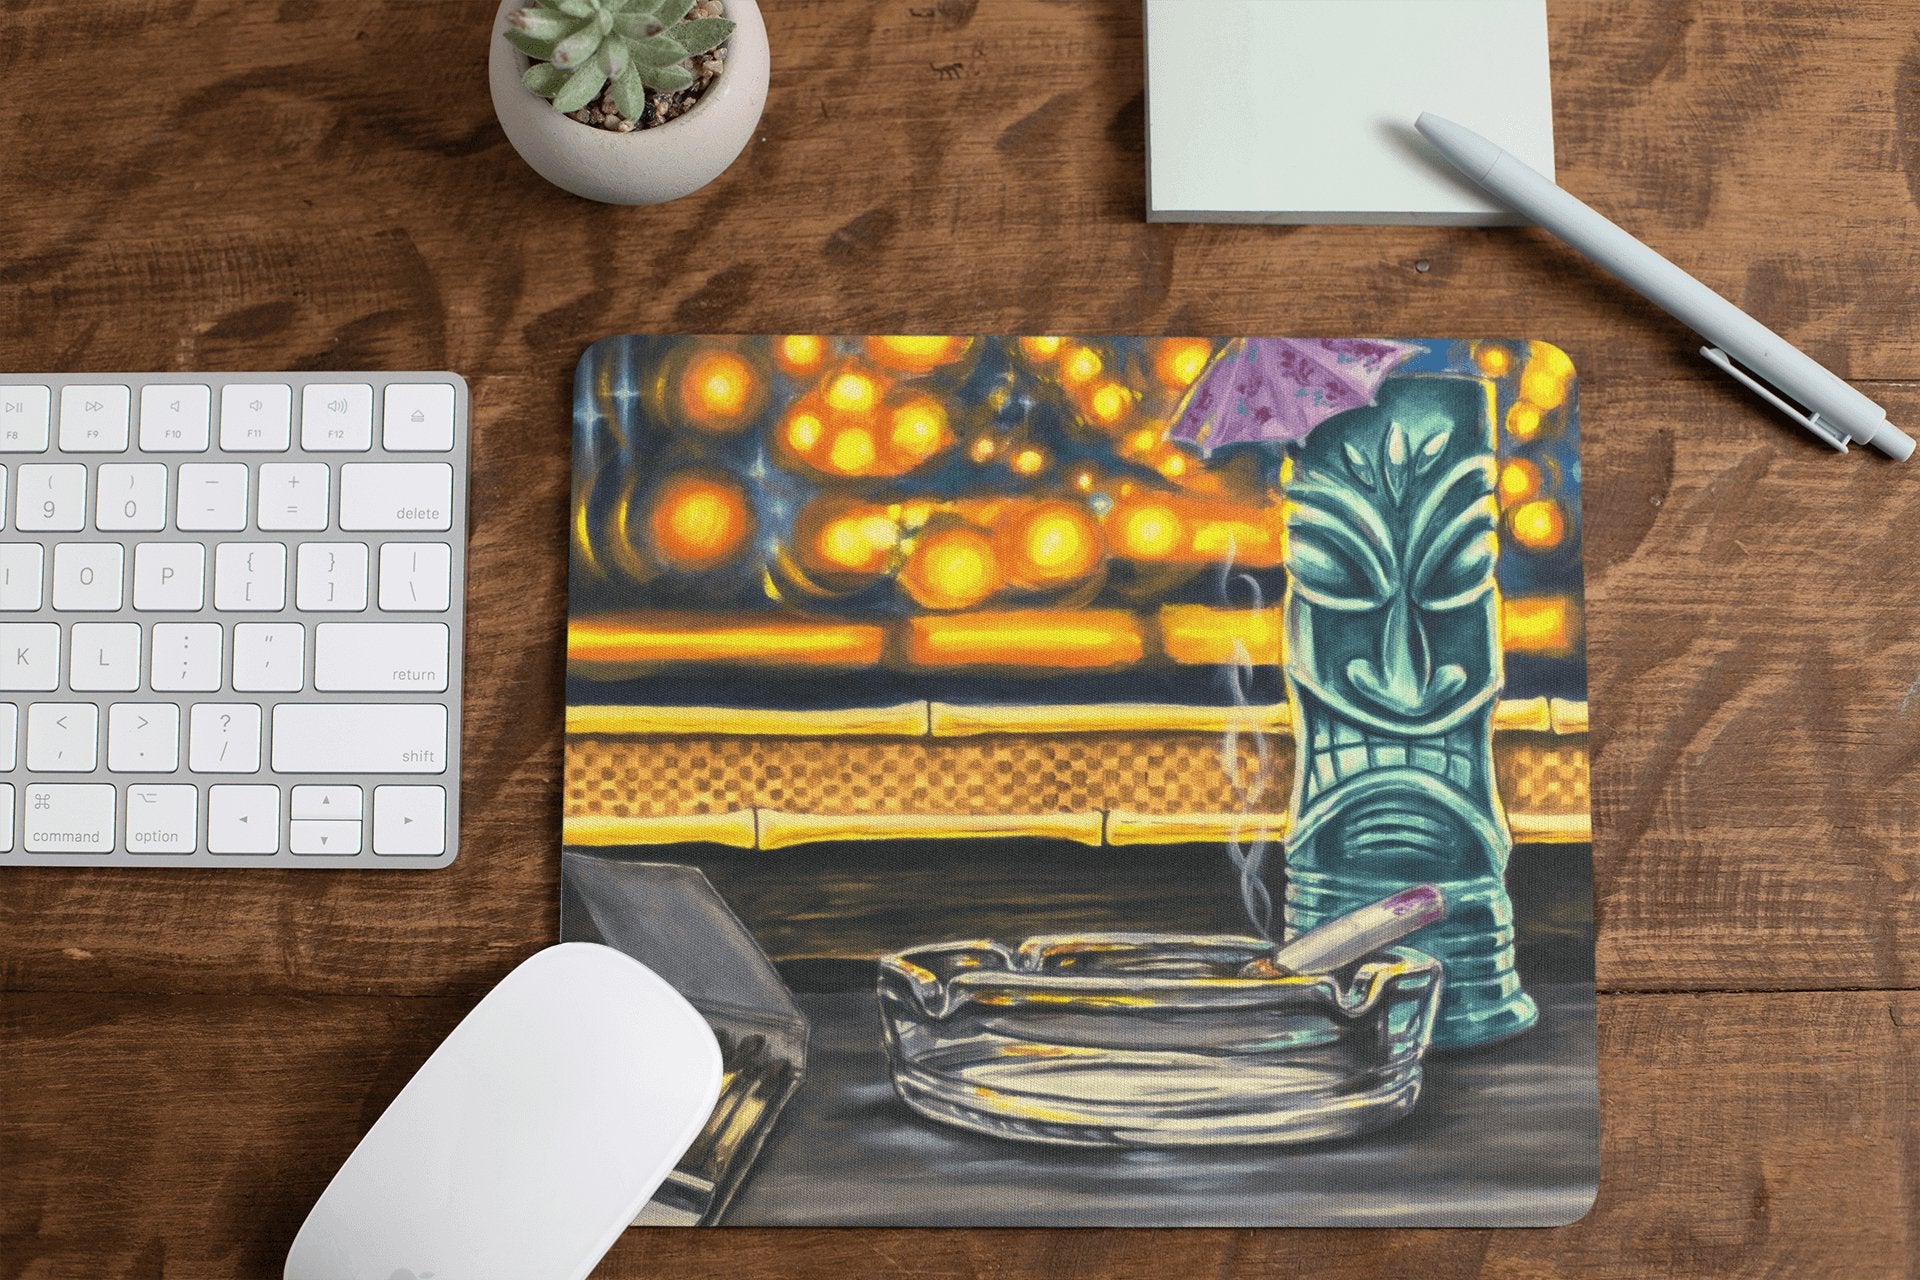 Beth stepped away - MaddK Studio - Mouse pad - Horrible Designs